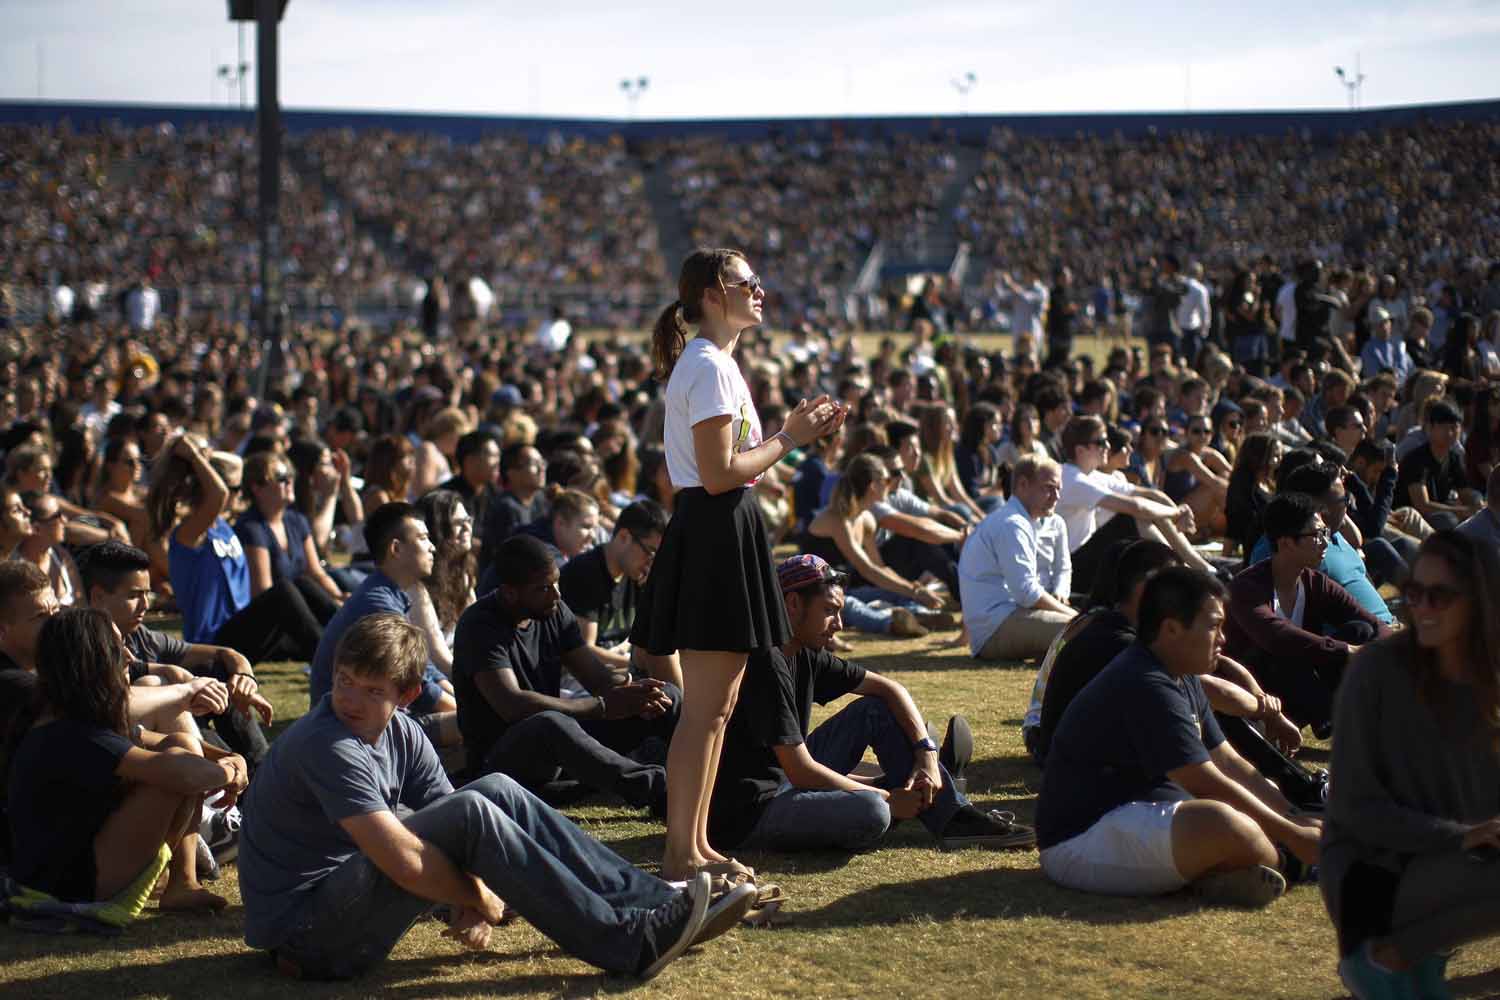 UCSB Holds Memorial Service For Shooting Victims At Harder Stadium